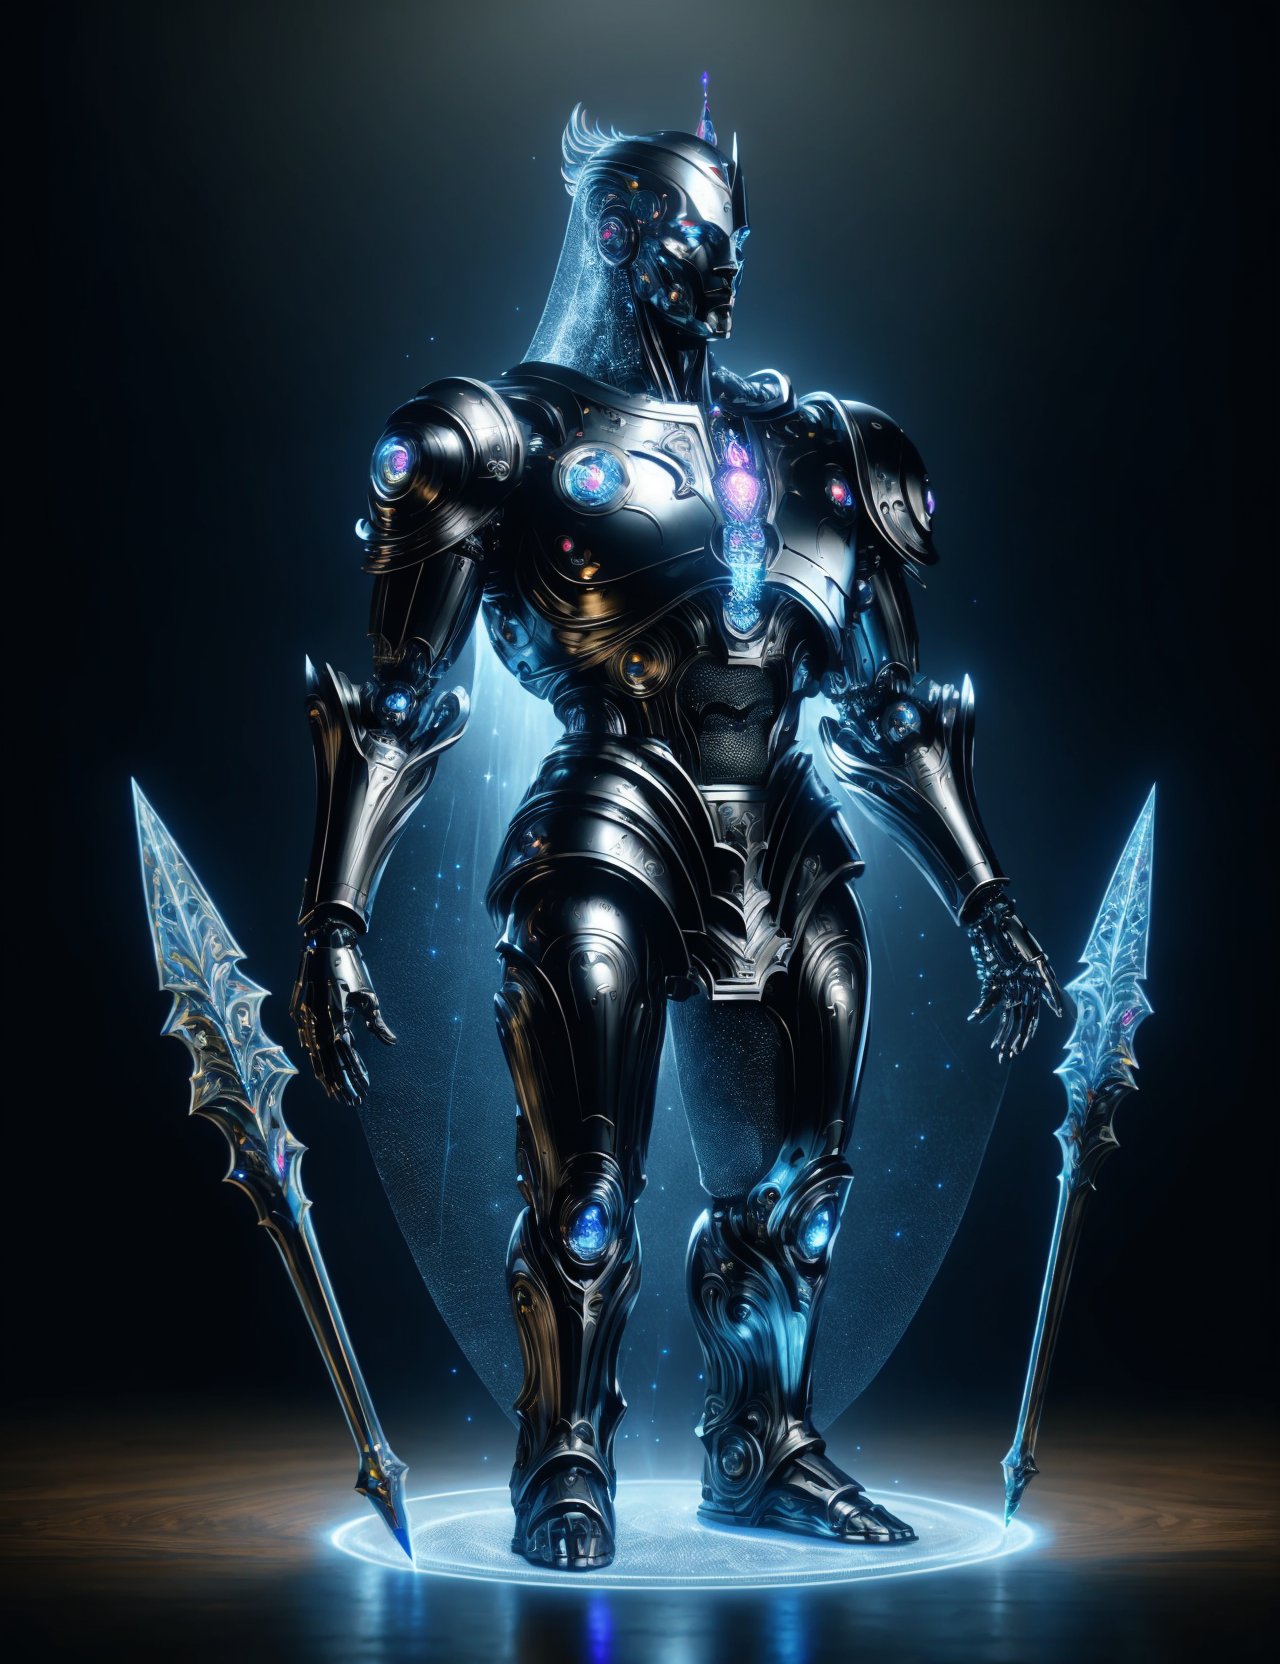 hyper detailed masterpiece, dynamic, awesome quality,DonMSt33lM4g1c male artificial intelligence (ais)- digital entities represented as holographic projections or glowing avatars, king,, wooden spear, made of steel <lora:DonMSt33lM4g1c-000008:0.8>